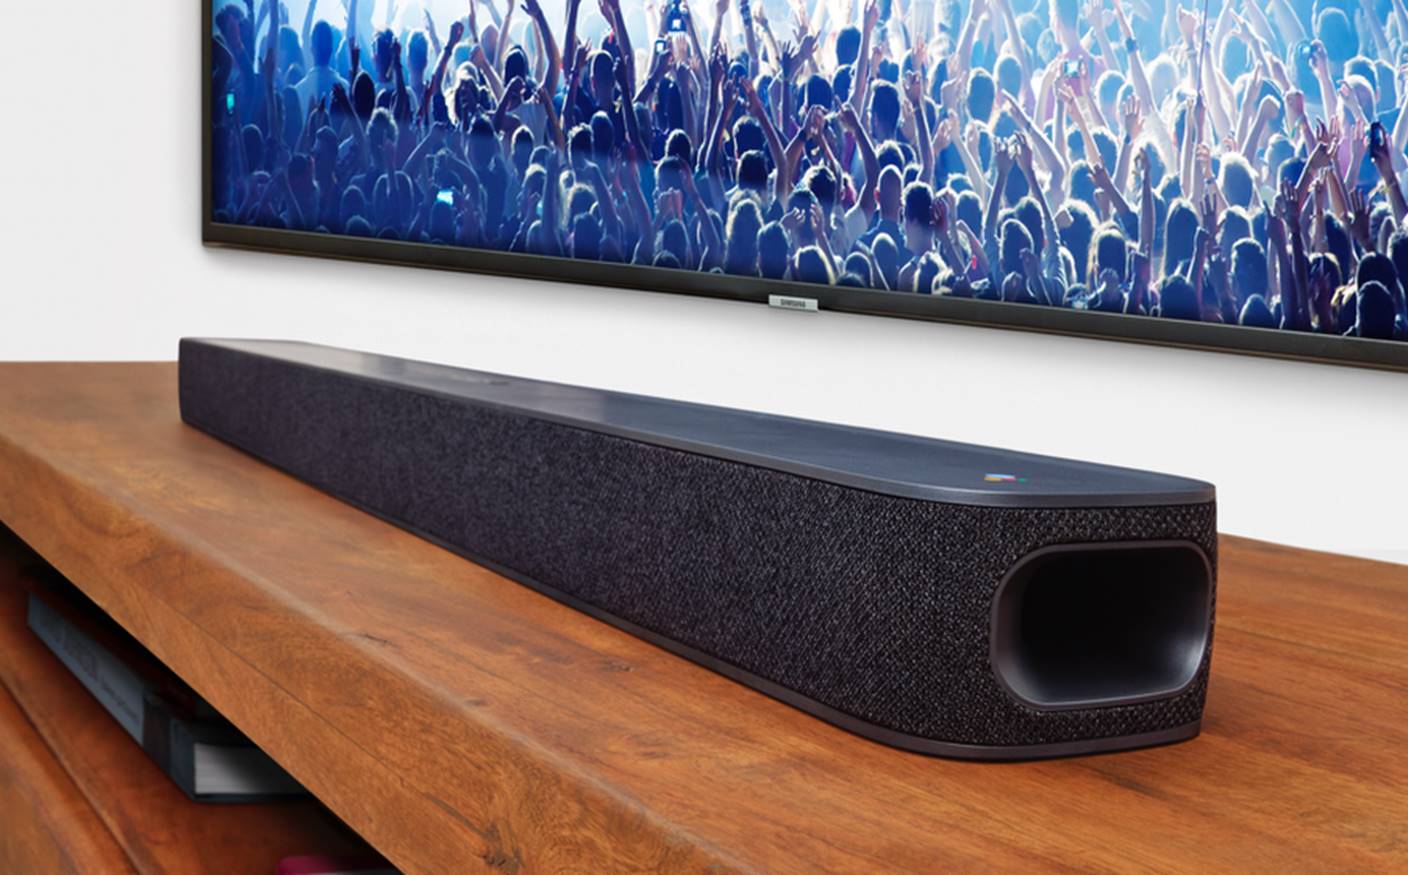 Up 2021 hook soundbar hdmi ✔️ to how with Online TV